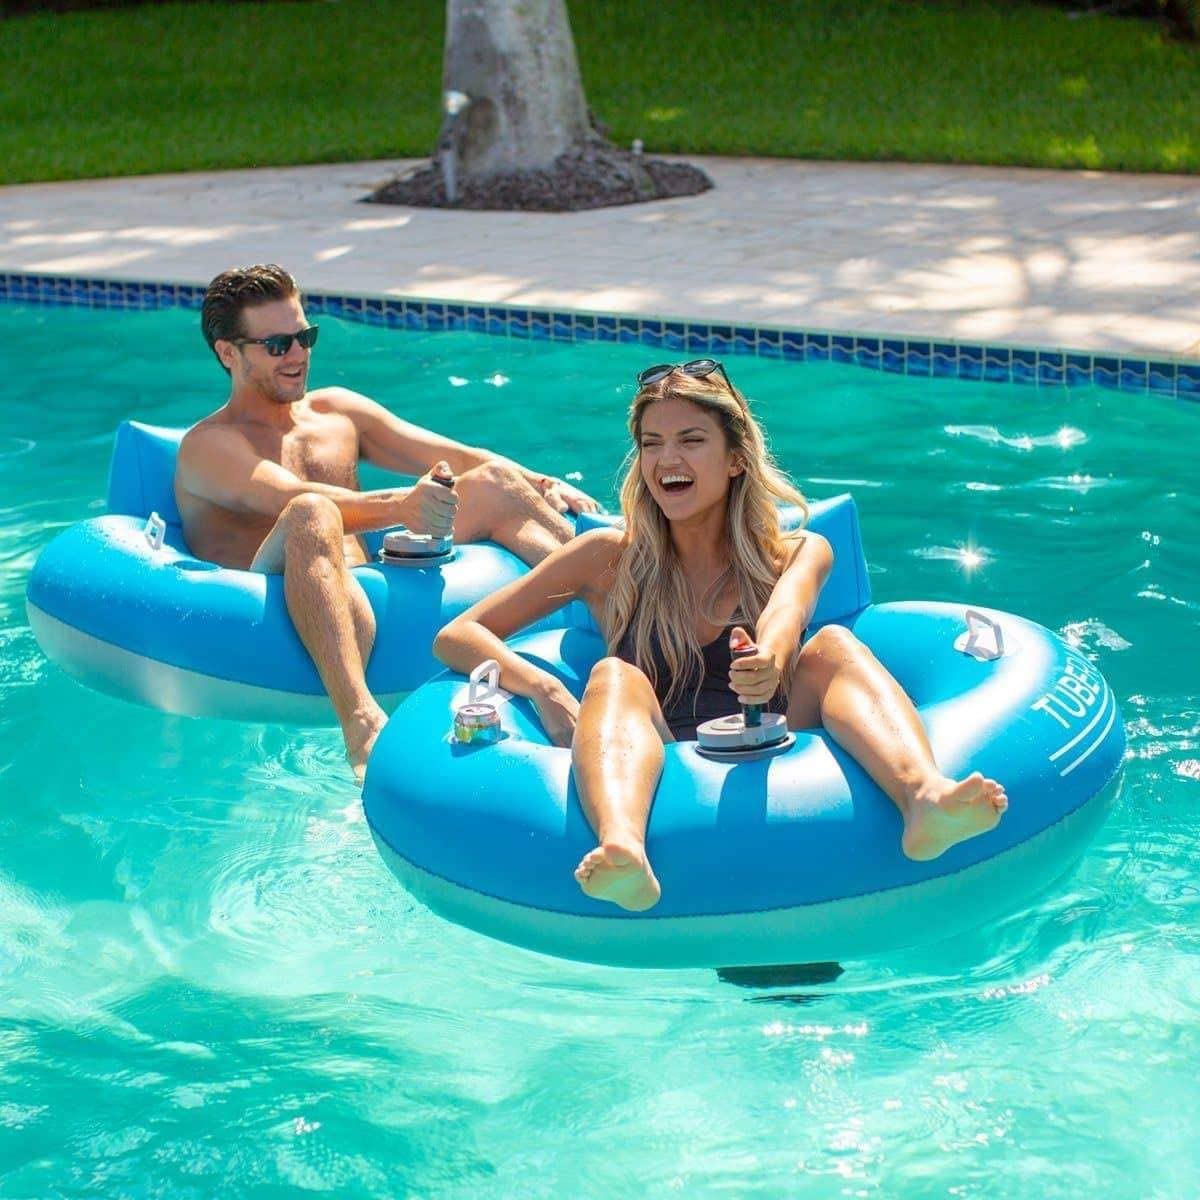 PoolCandy Tube Runner Motorized Water Float, Deluxe Inflatable Swimming Pool or Water Tube, 3-Blade Propeller in Safety Grill, Battery-Powered Motor, Great for Pool, Lake, Adults, Teens, Kids